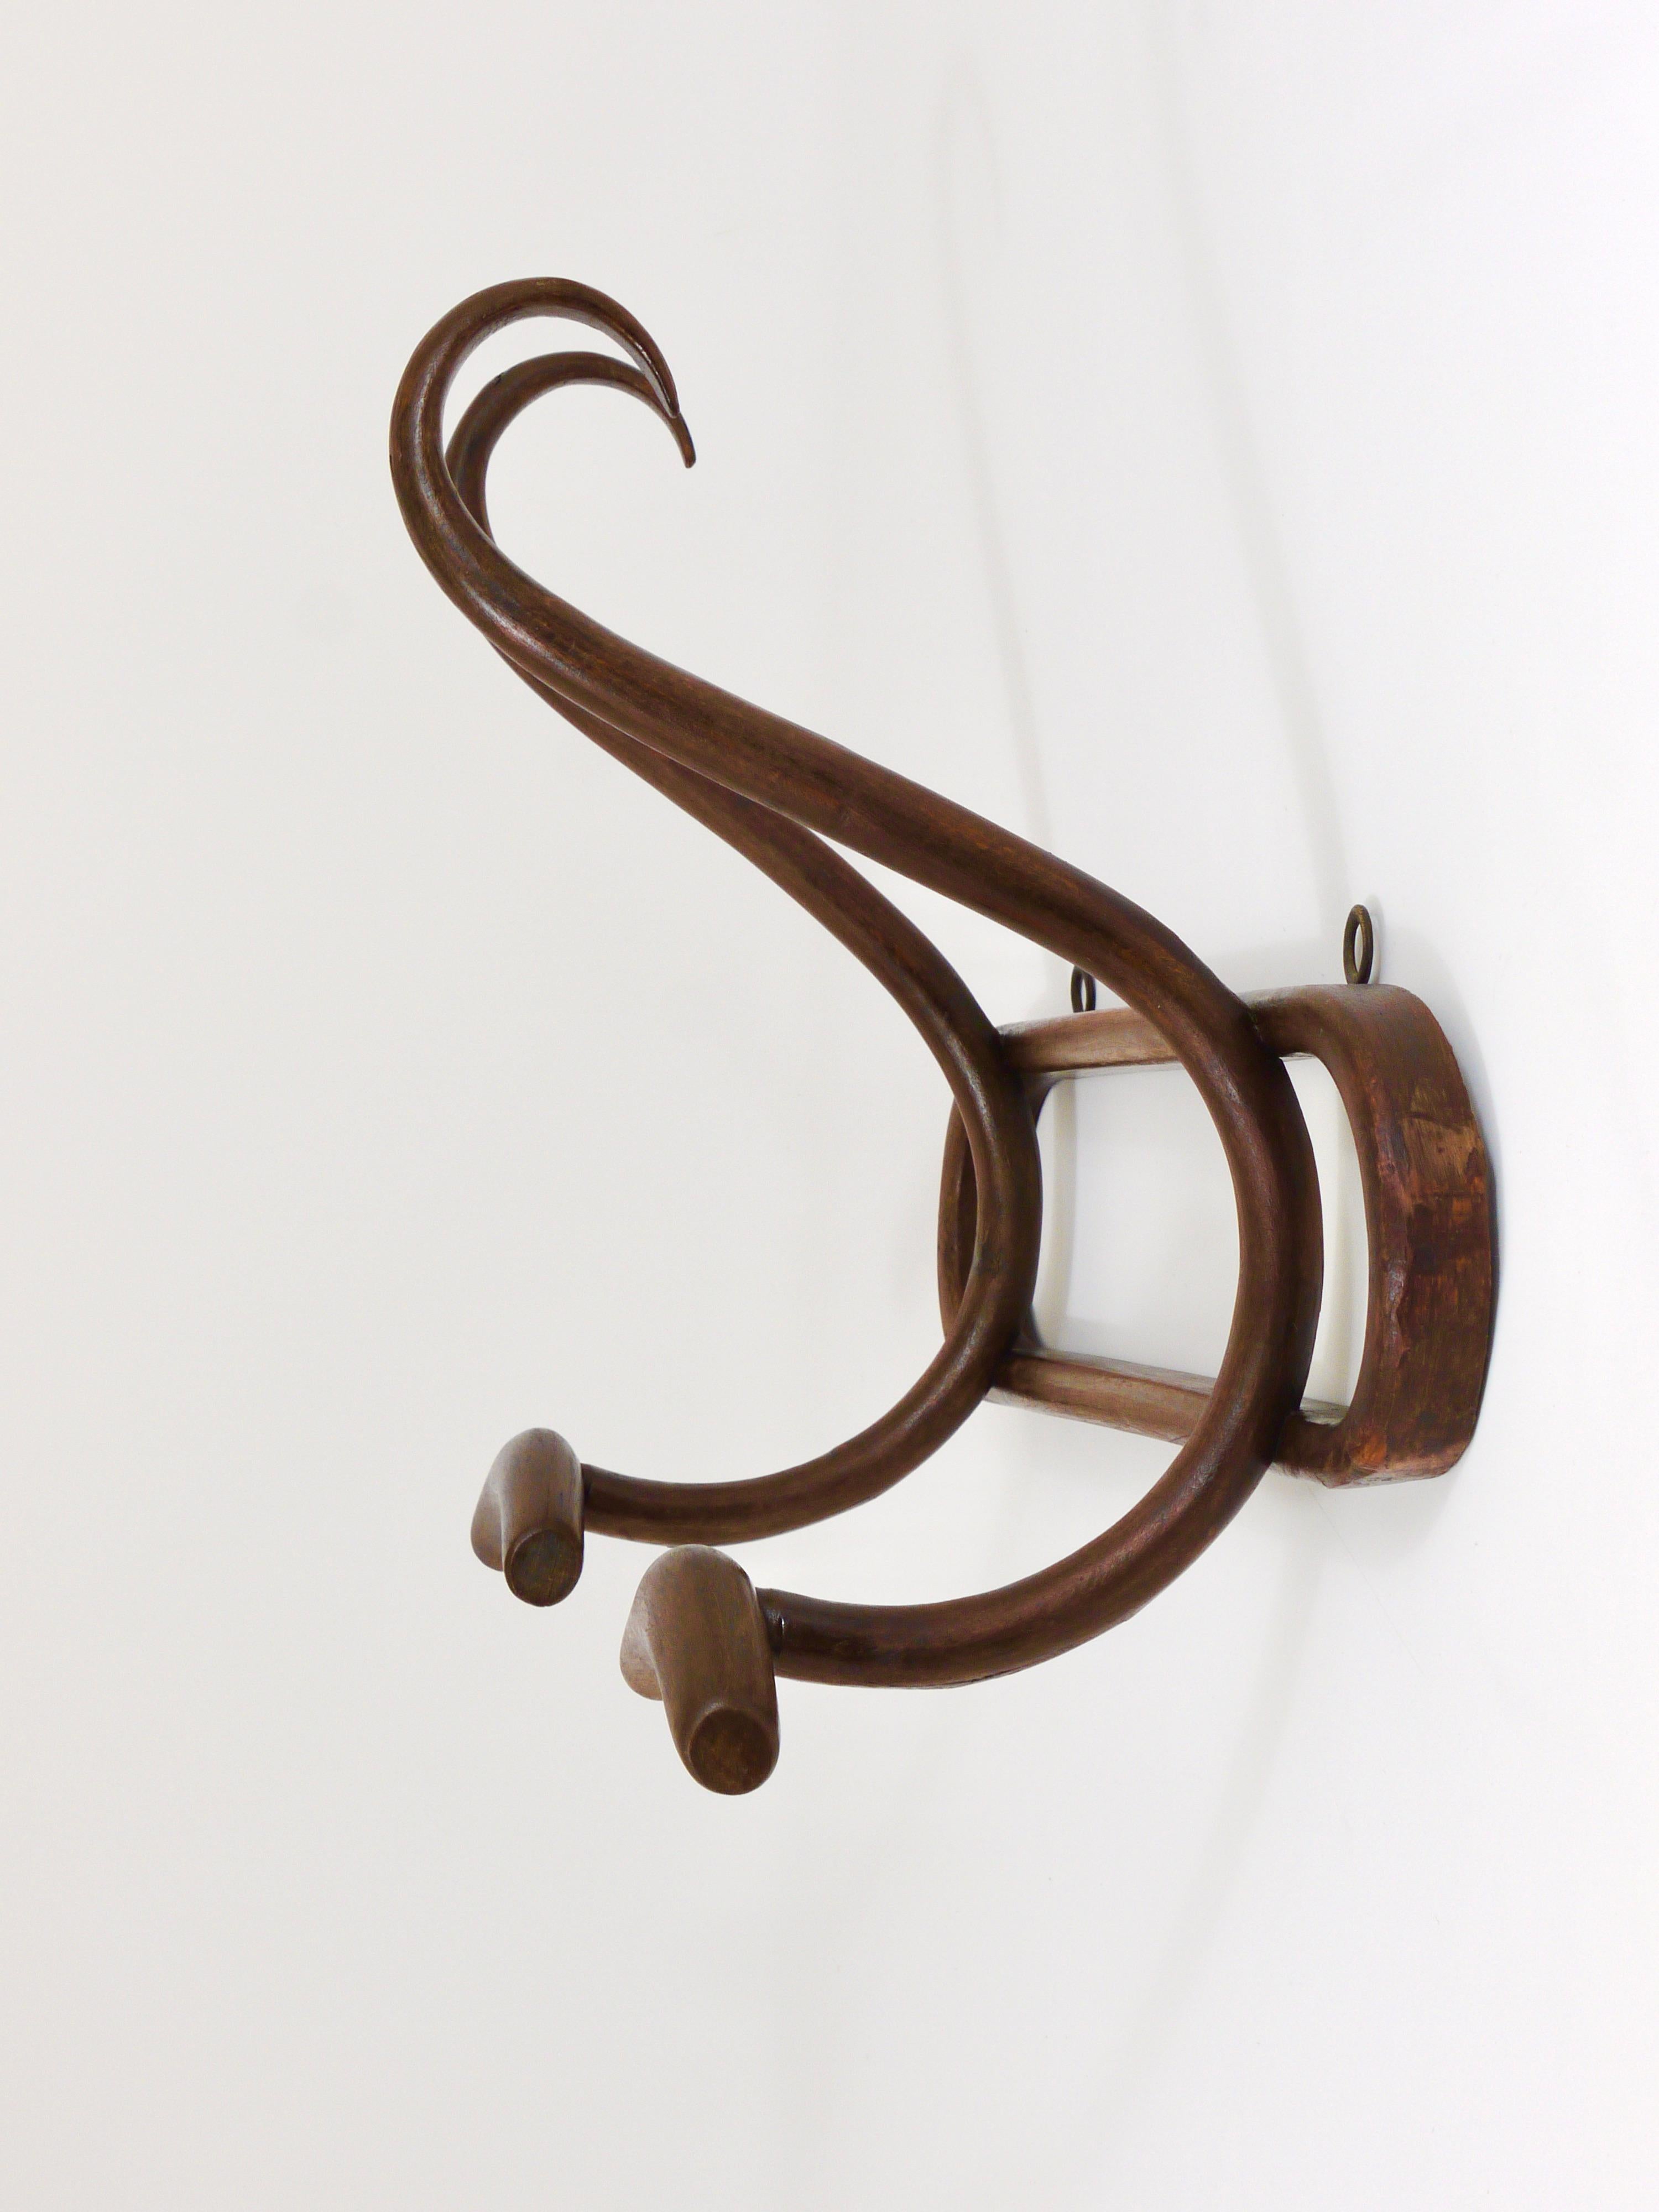 A beautiful brown Art Nouveau wall-mounted coat and hat rack from the 1920s by Joamin Baumann for Baumann France. Made of bentwood, with two S-shaped hooks. In good condition with patina.